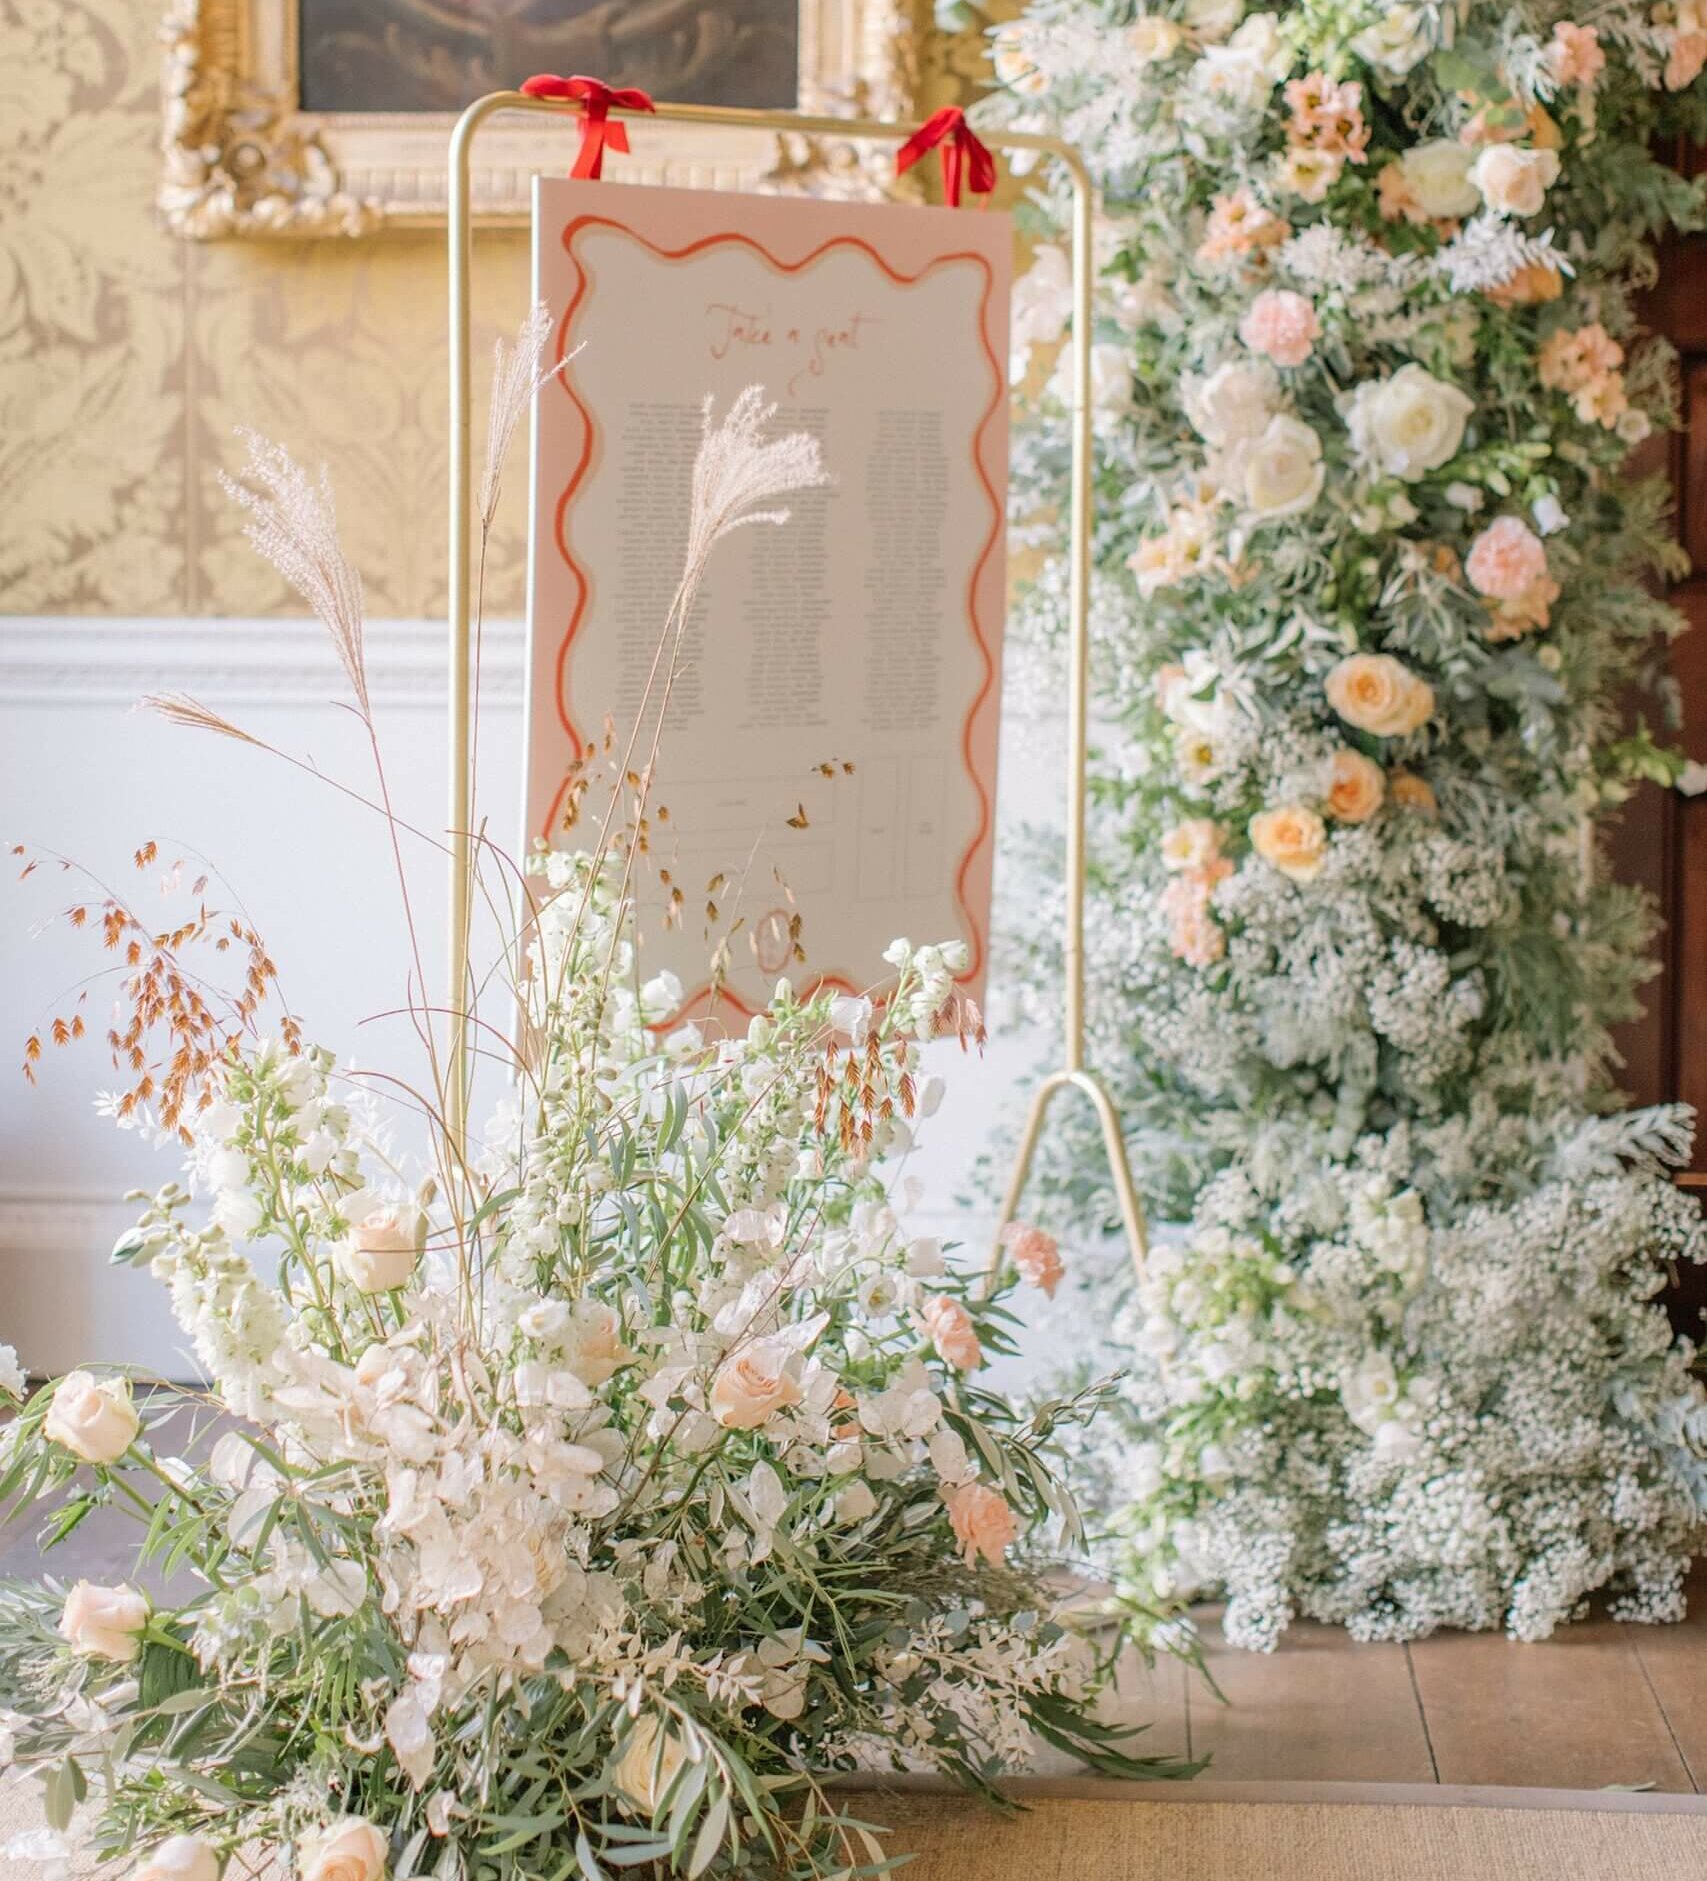 Pink and red florals surround a modern table plan for the wedding breakfast at St Giles House